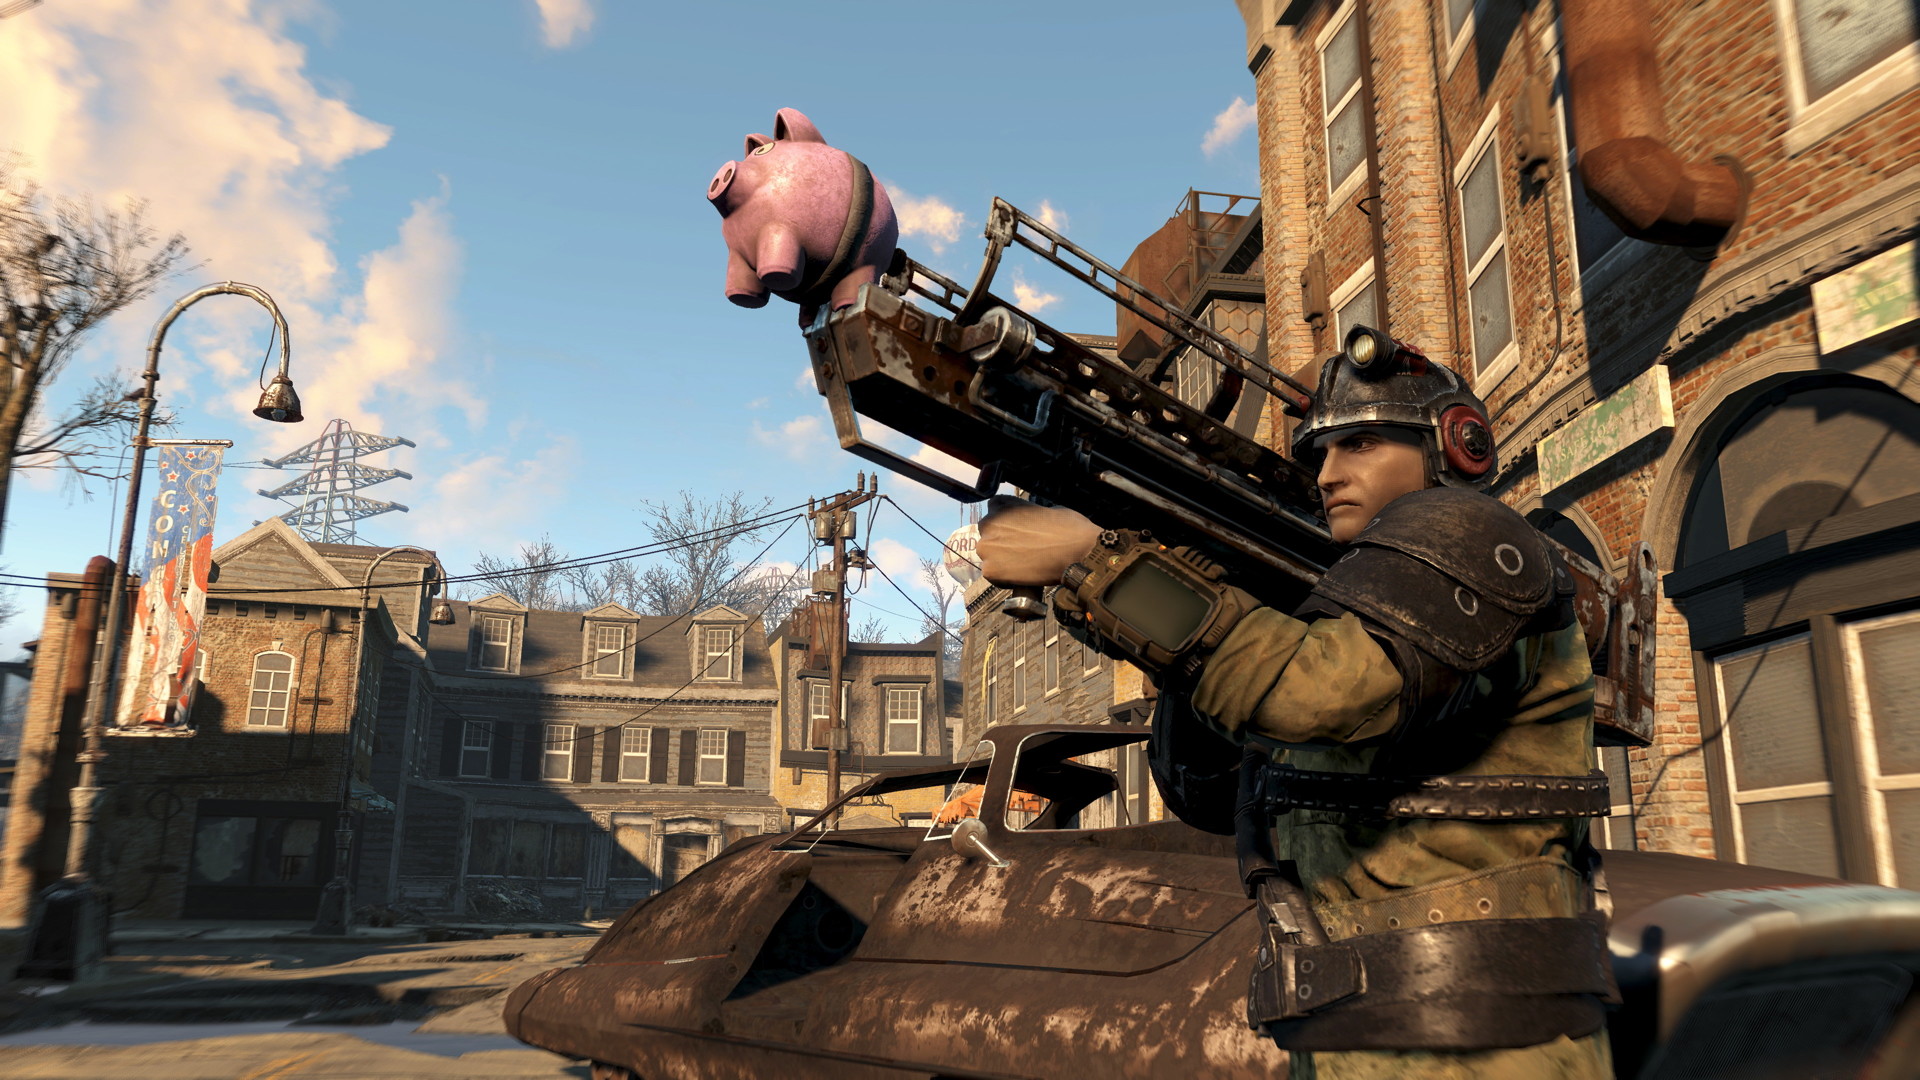 A Fallout 4 character hoists an improvised weapon which looks like a rocket launcher whose payload is a piggybank.